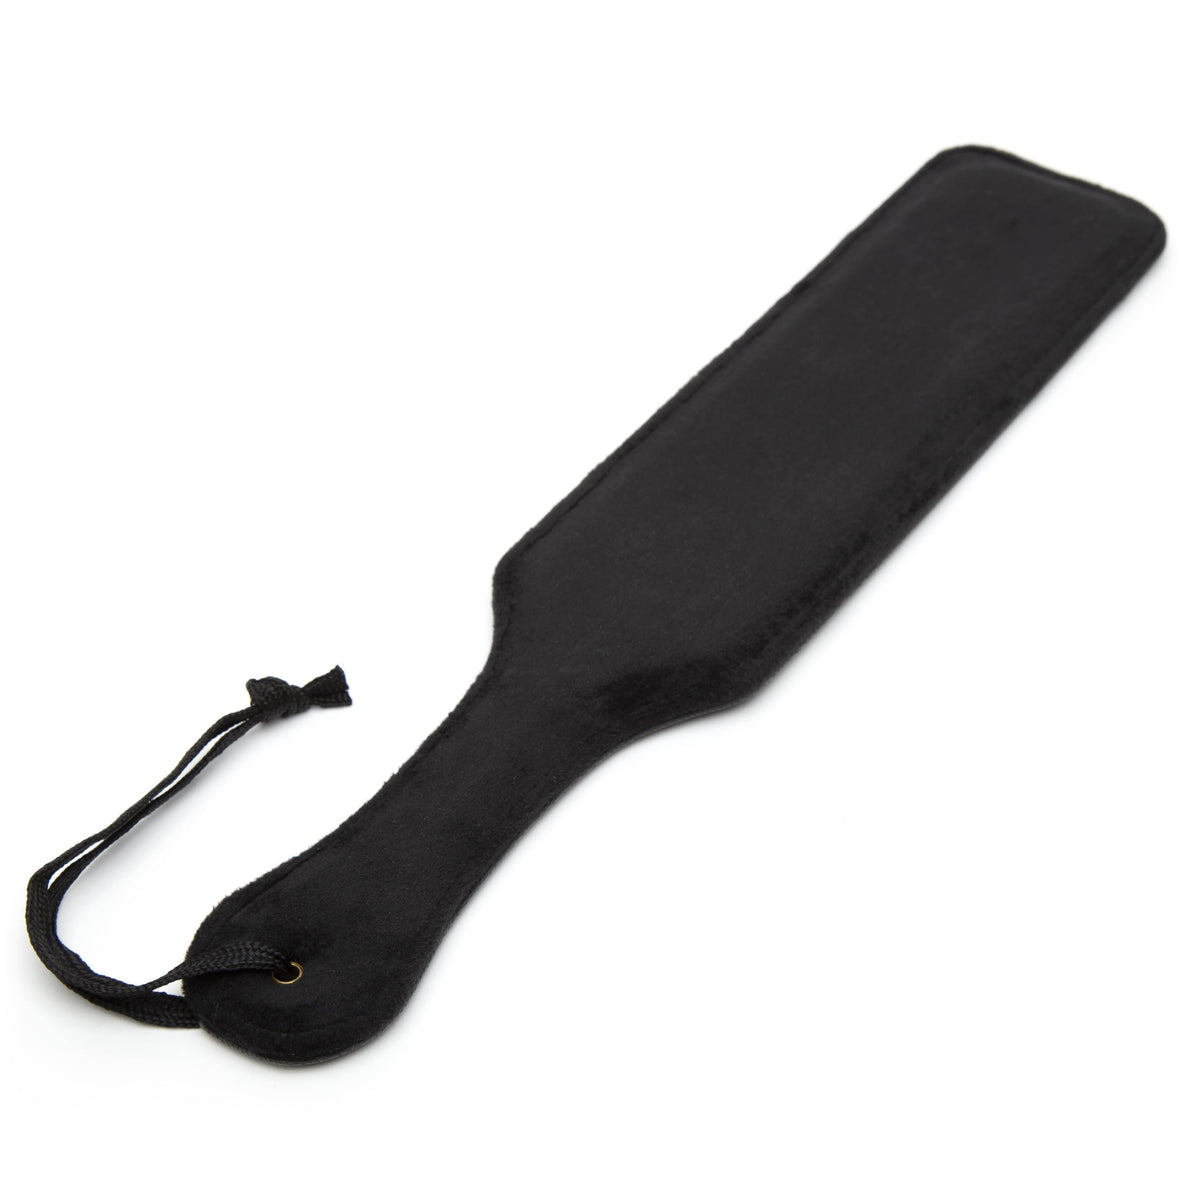 Fifty Shades of Grey - Bound to You Paddle (Black) Paddle 319728531 CherryAffairs